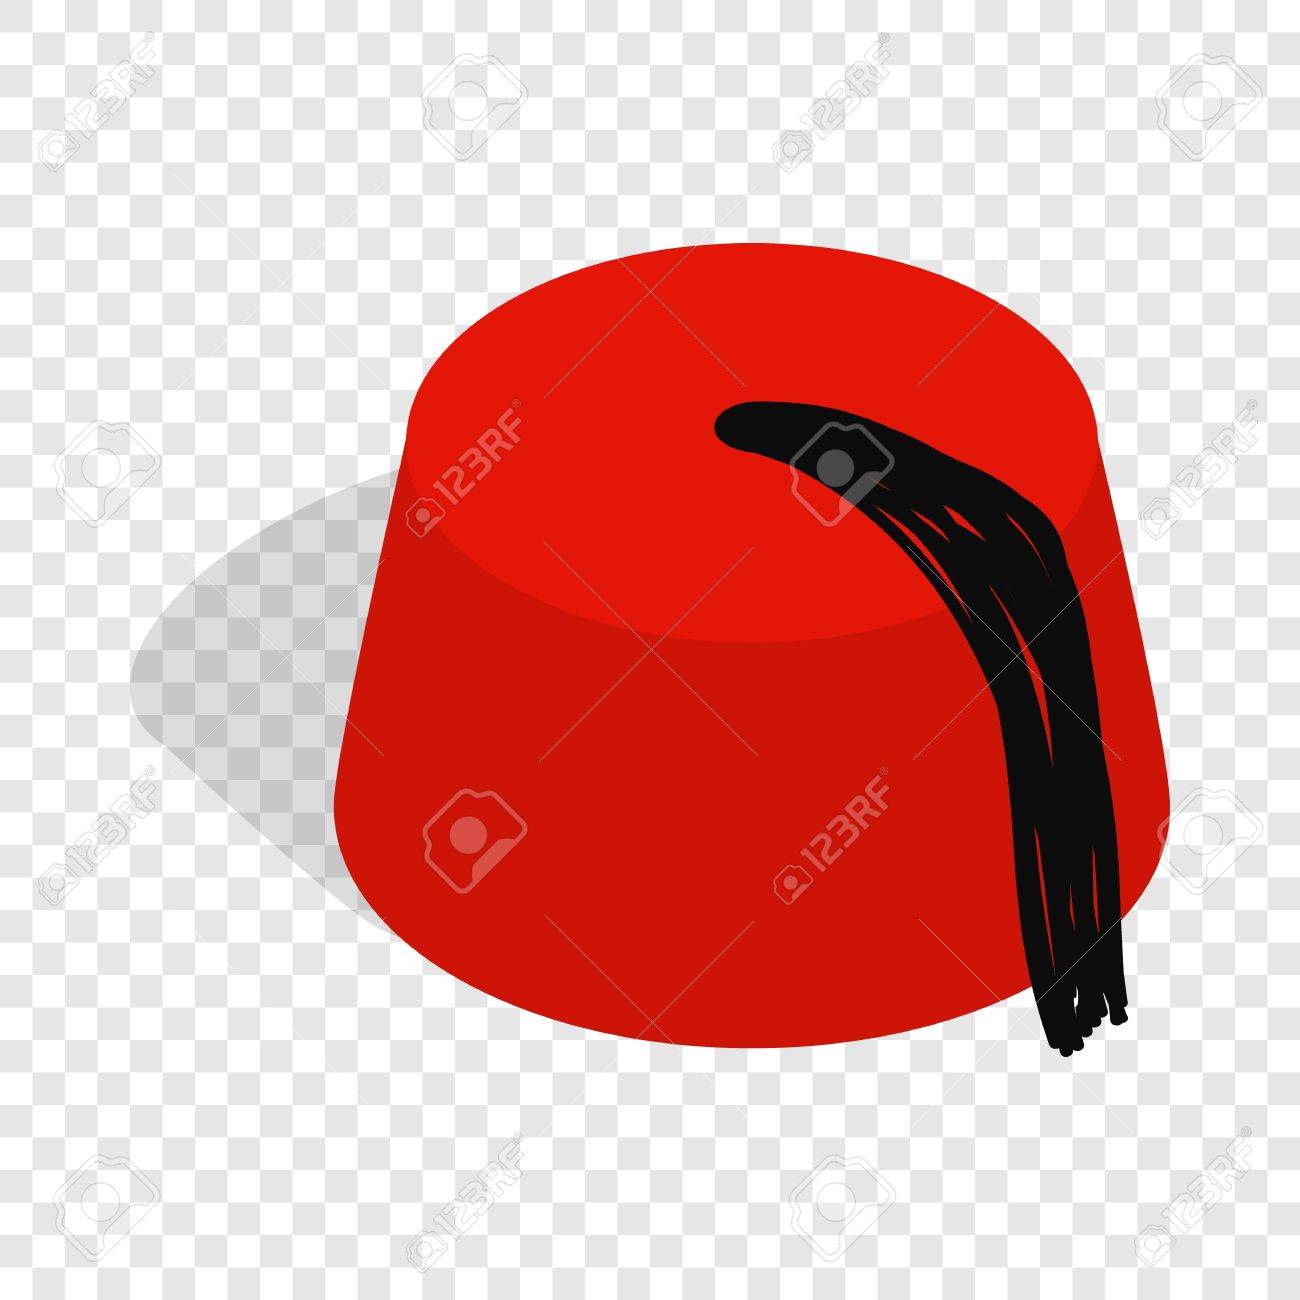 Turkish Hat Fez Isometric Icon 3d On A Transparent Background